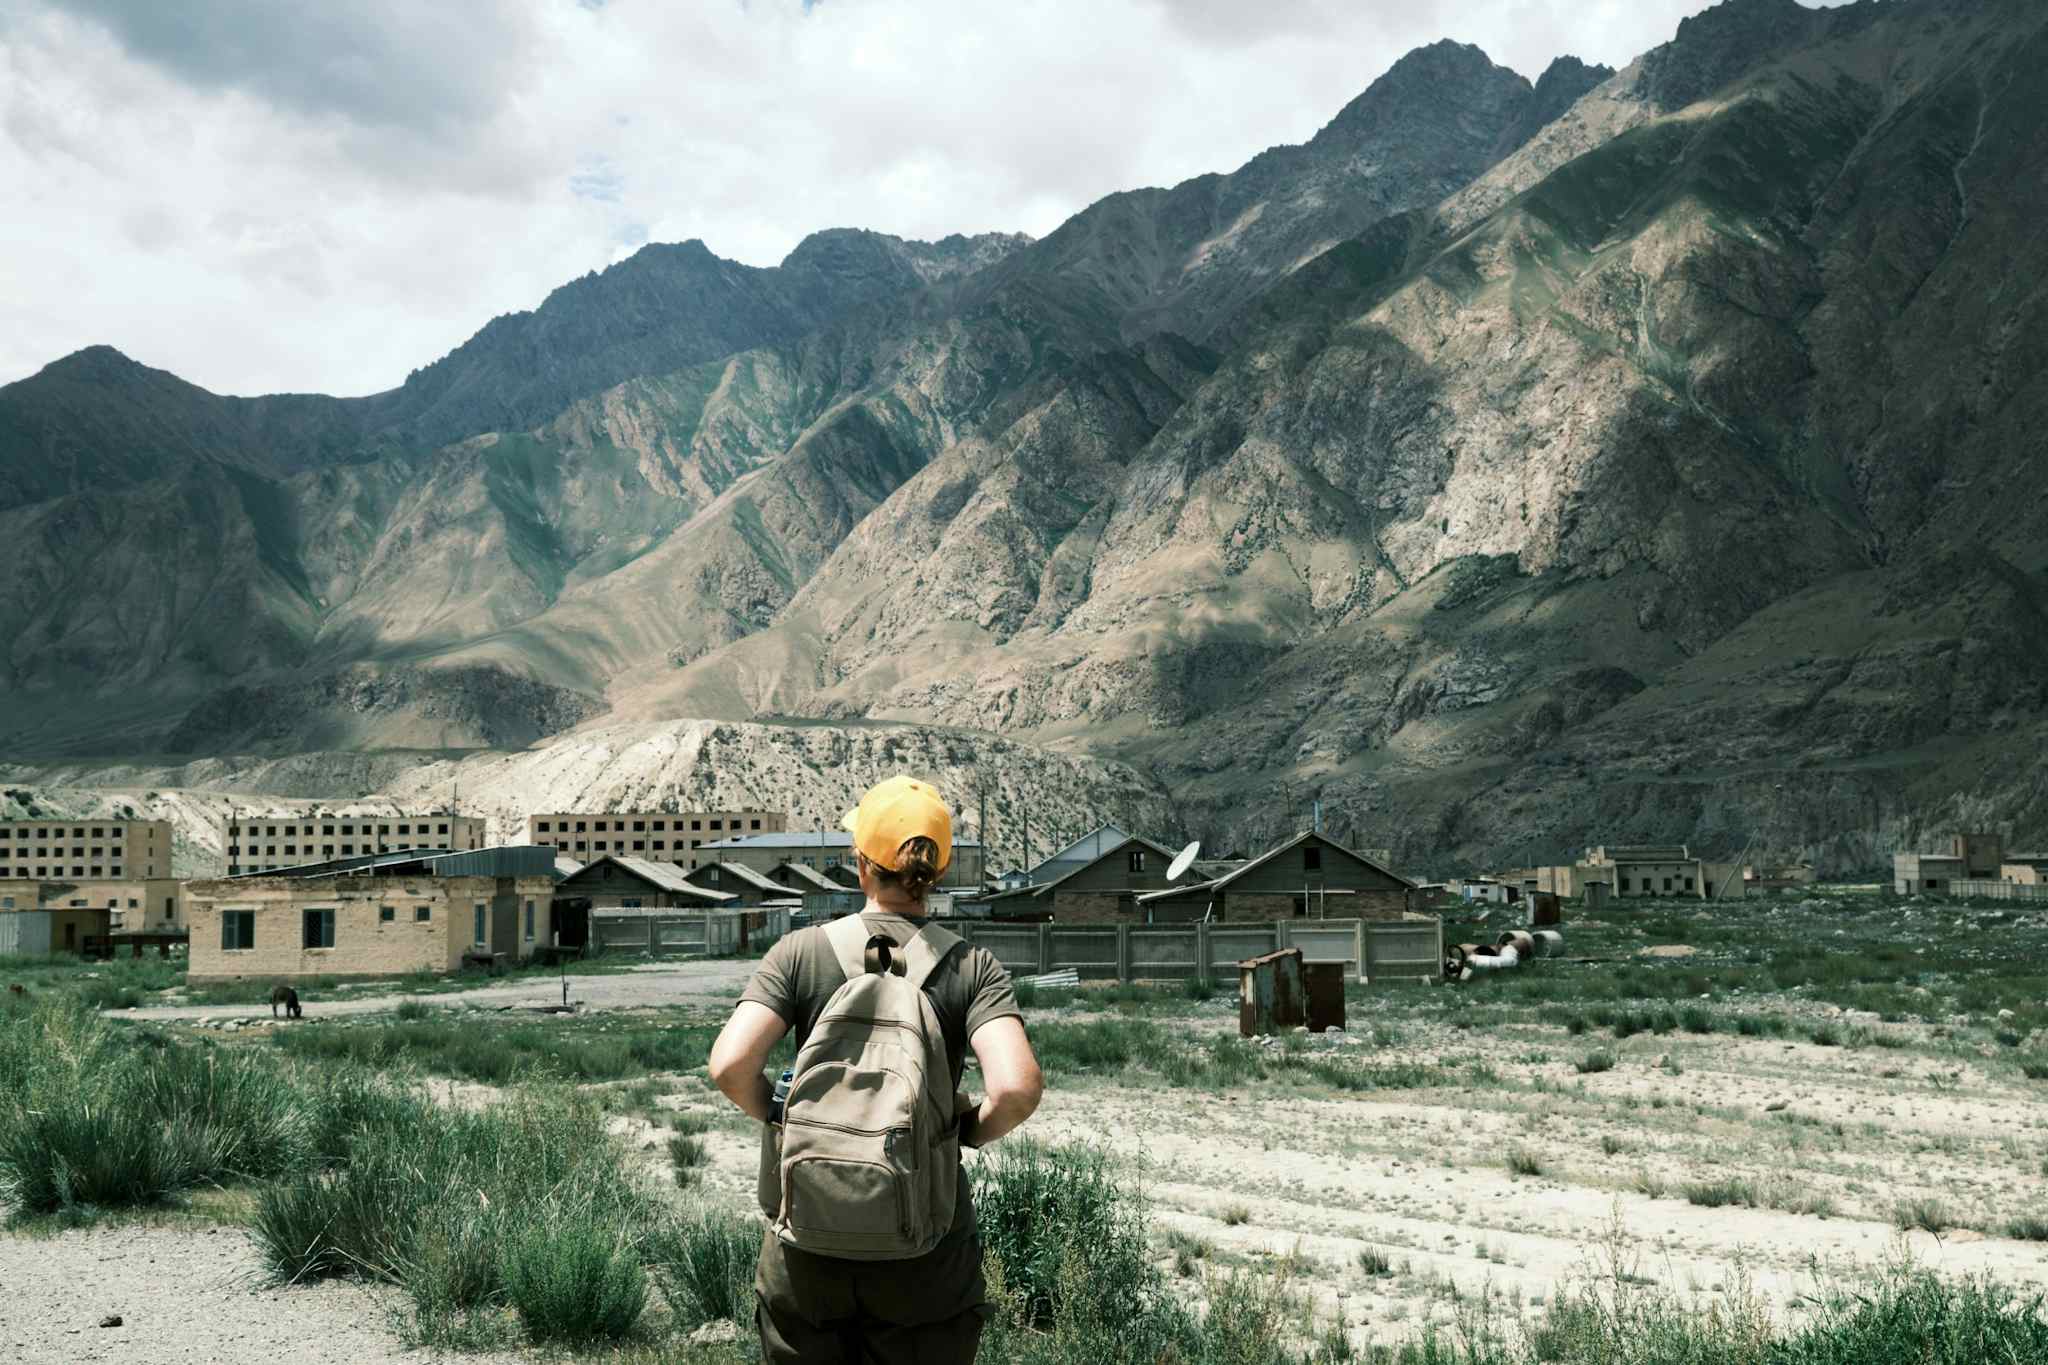 Backpacker overlooks the abandoned ghost town of Enylcheck in Kyrgyzstan